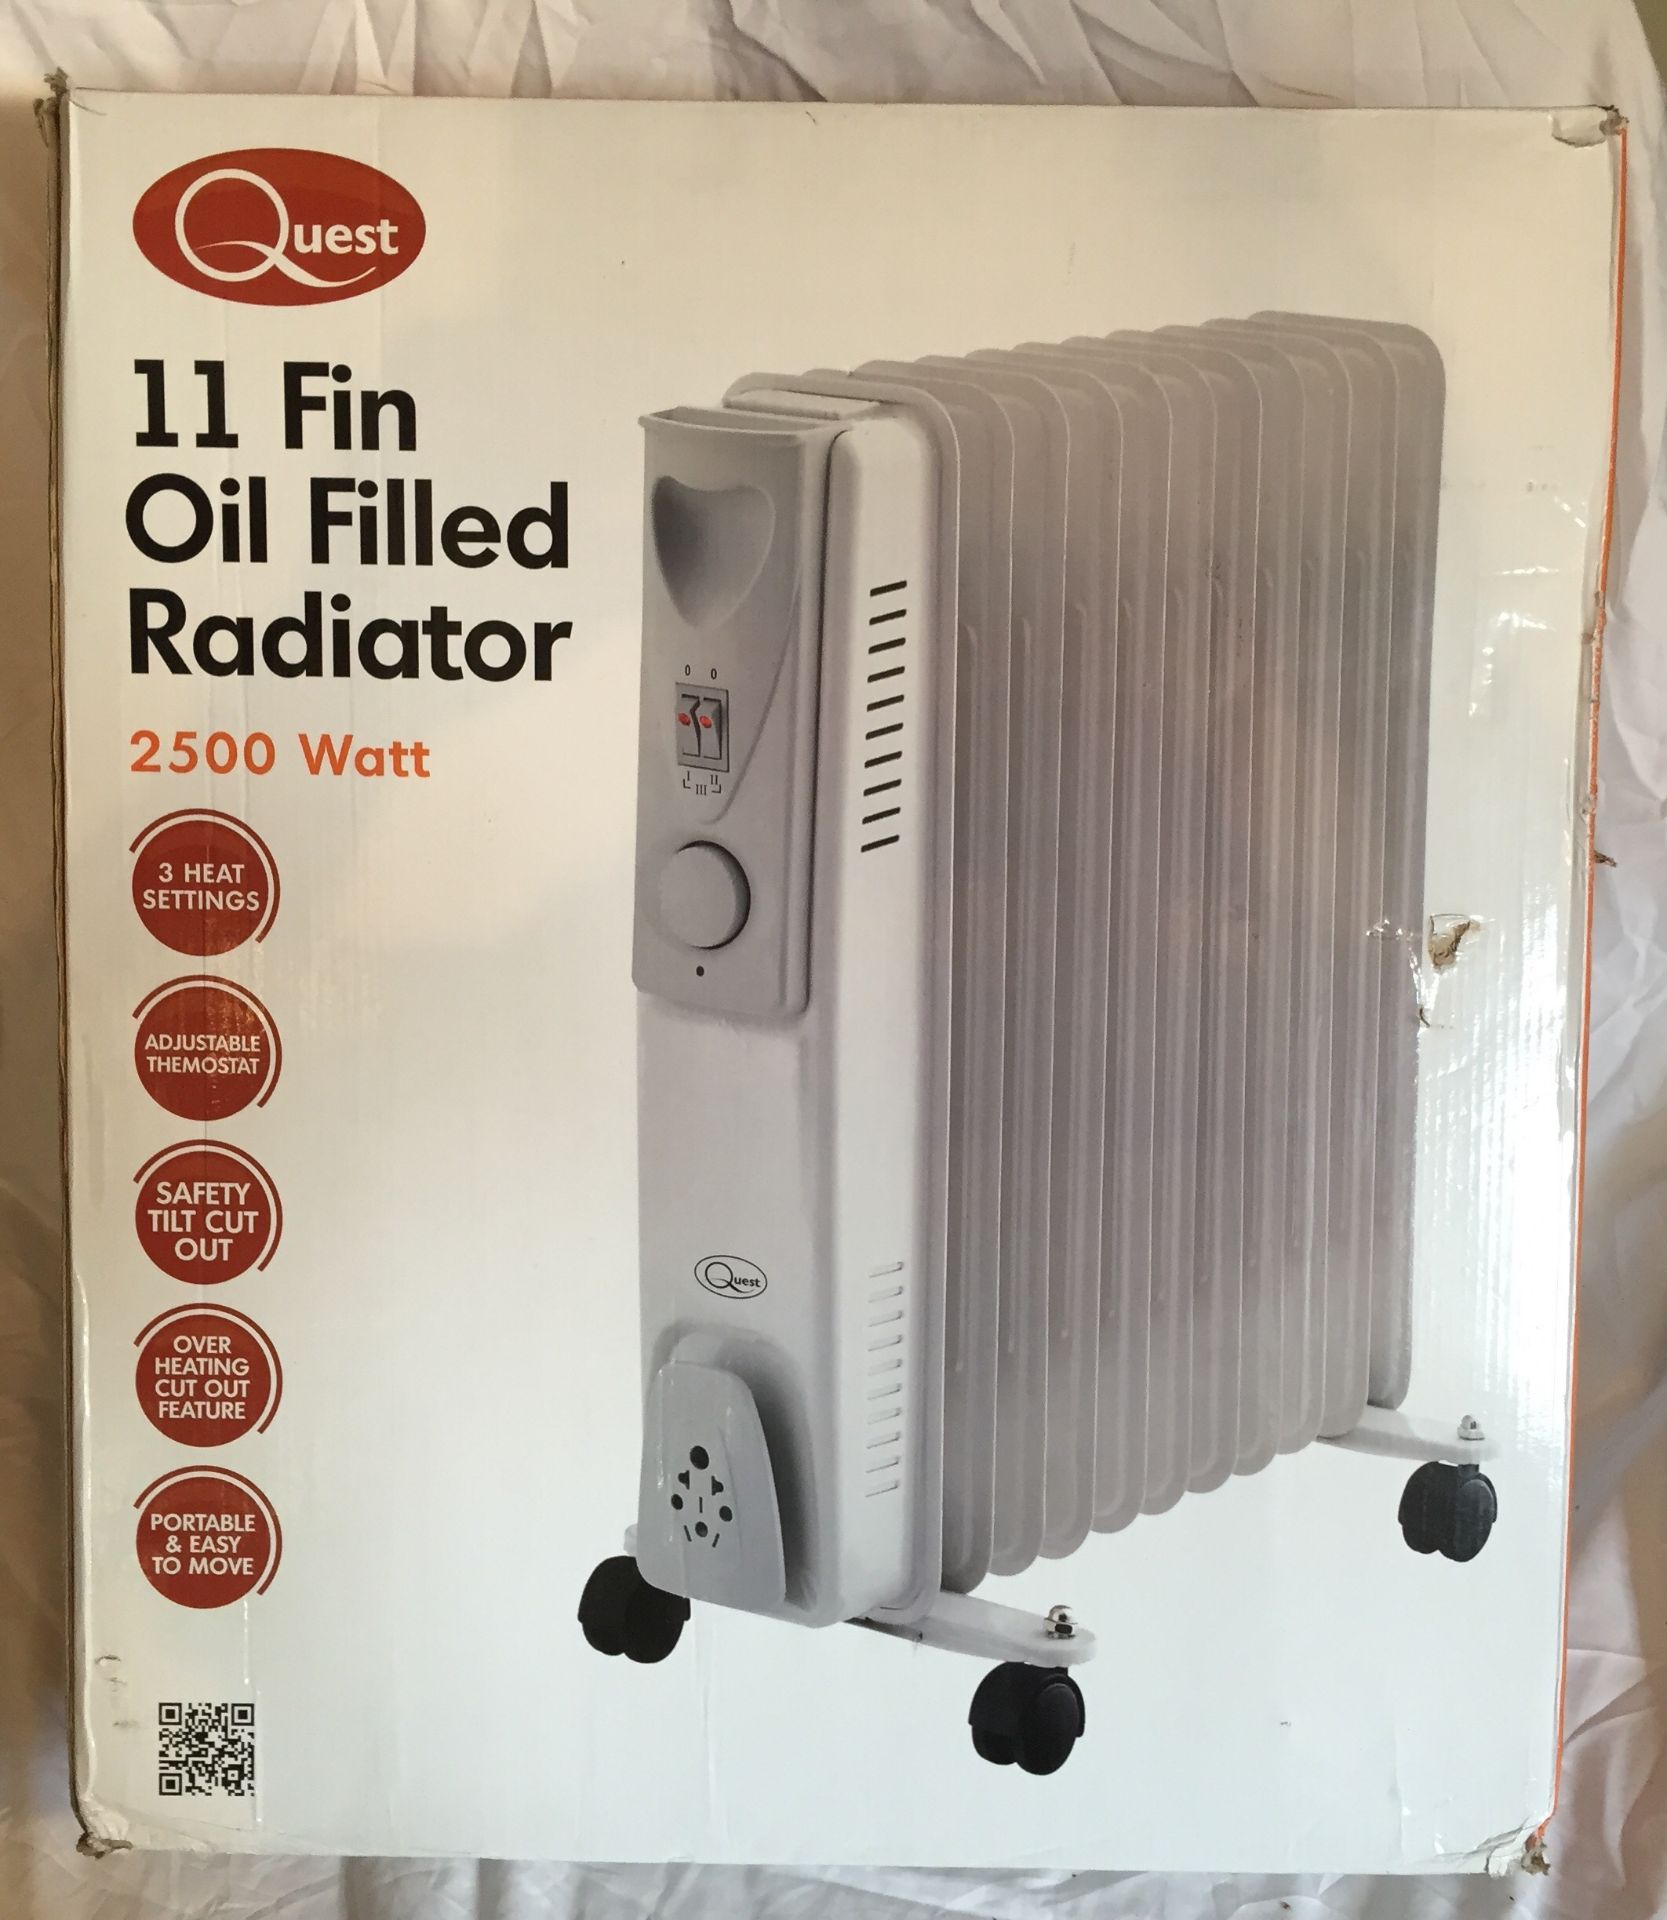 Quest Tall Oil Filled Radiator, 2500 Watt – RRP- £59.99
Quick & Easy To Assemble
Portable & Easy To